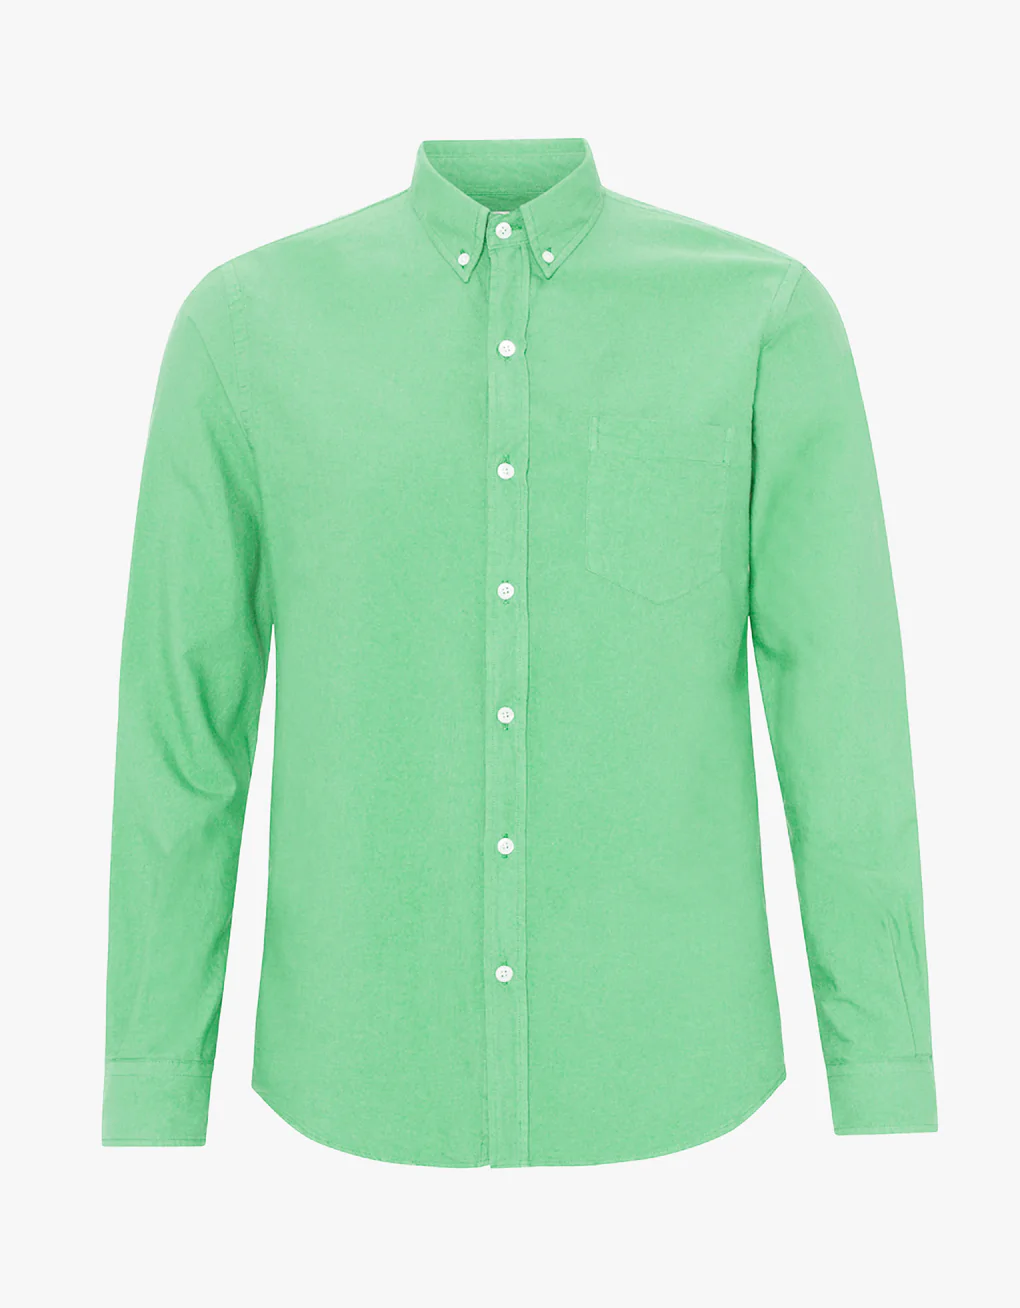 Colorful_S_Org_button_down_shirt_spring_green